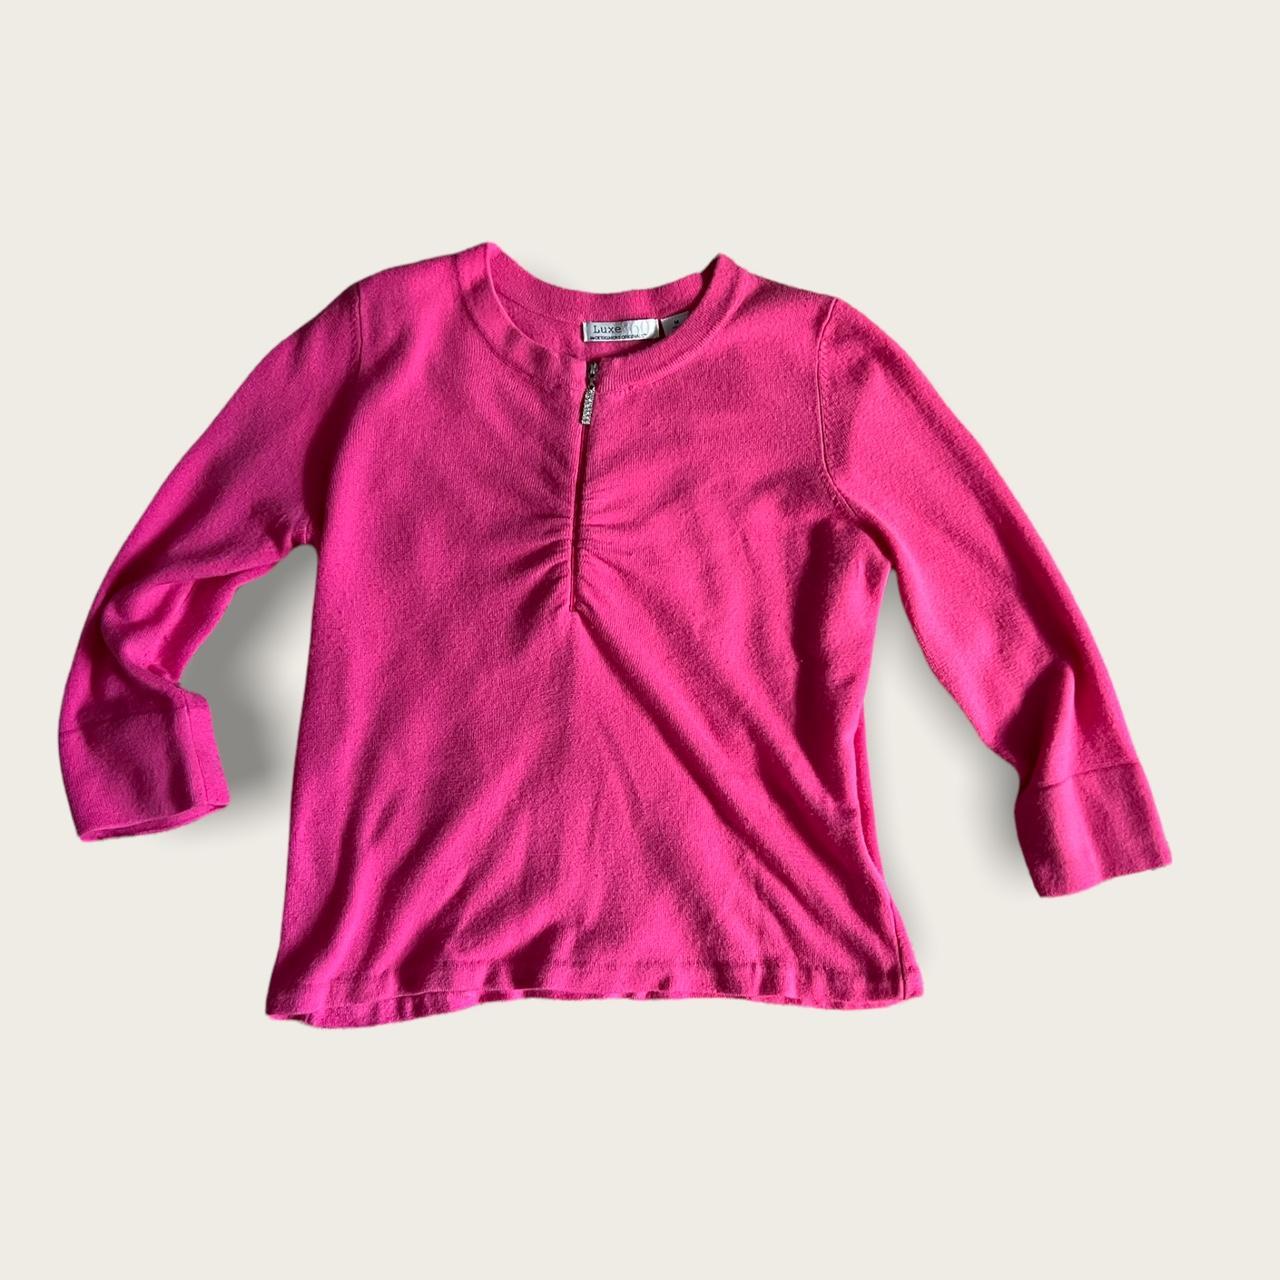 Femme Luxe Women's Pink and Silver Jumper